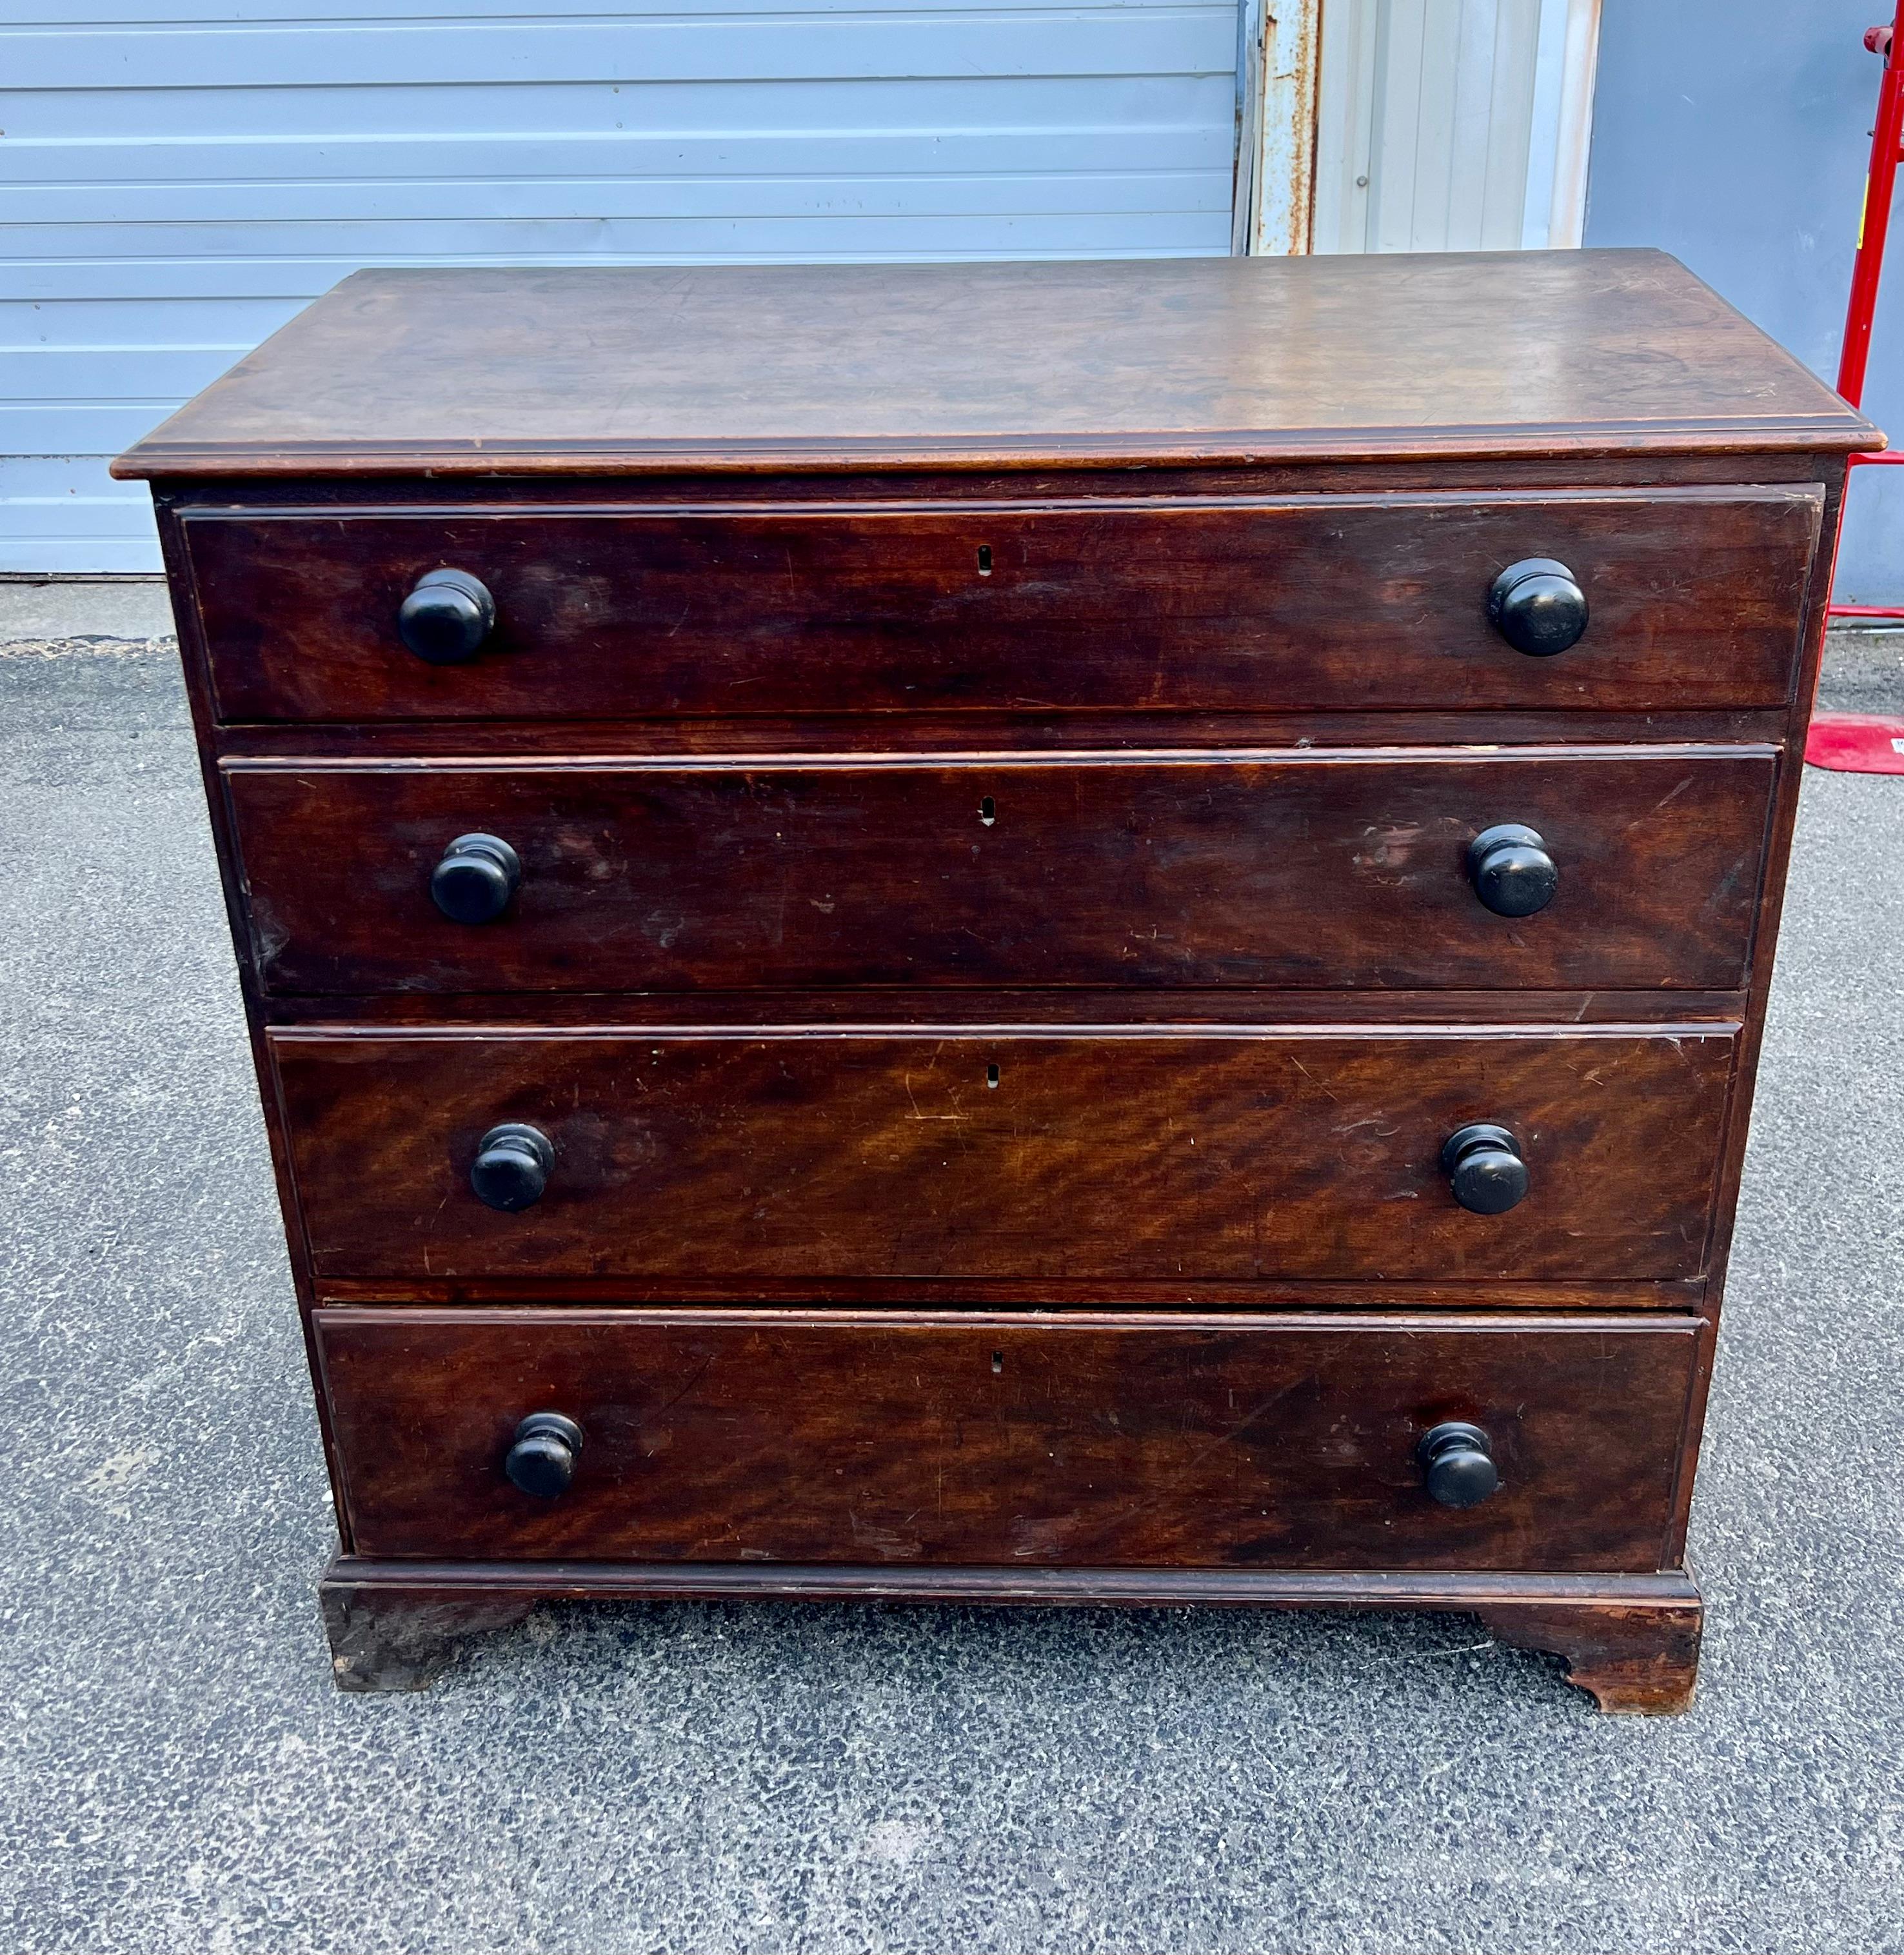 Early 19th century Flame Birch chest of drawers.  With original stain and lovely grain, four graduated drawers with beaded drawer fronts and turned knob pulls, on ogee bracket feet.  From Nova Scotia.